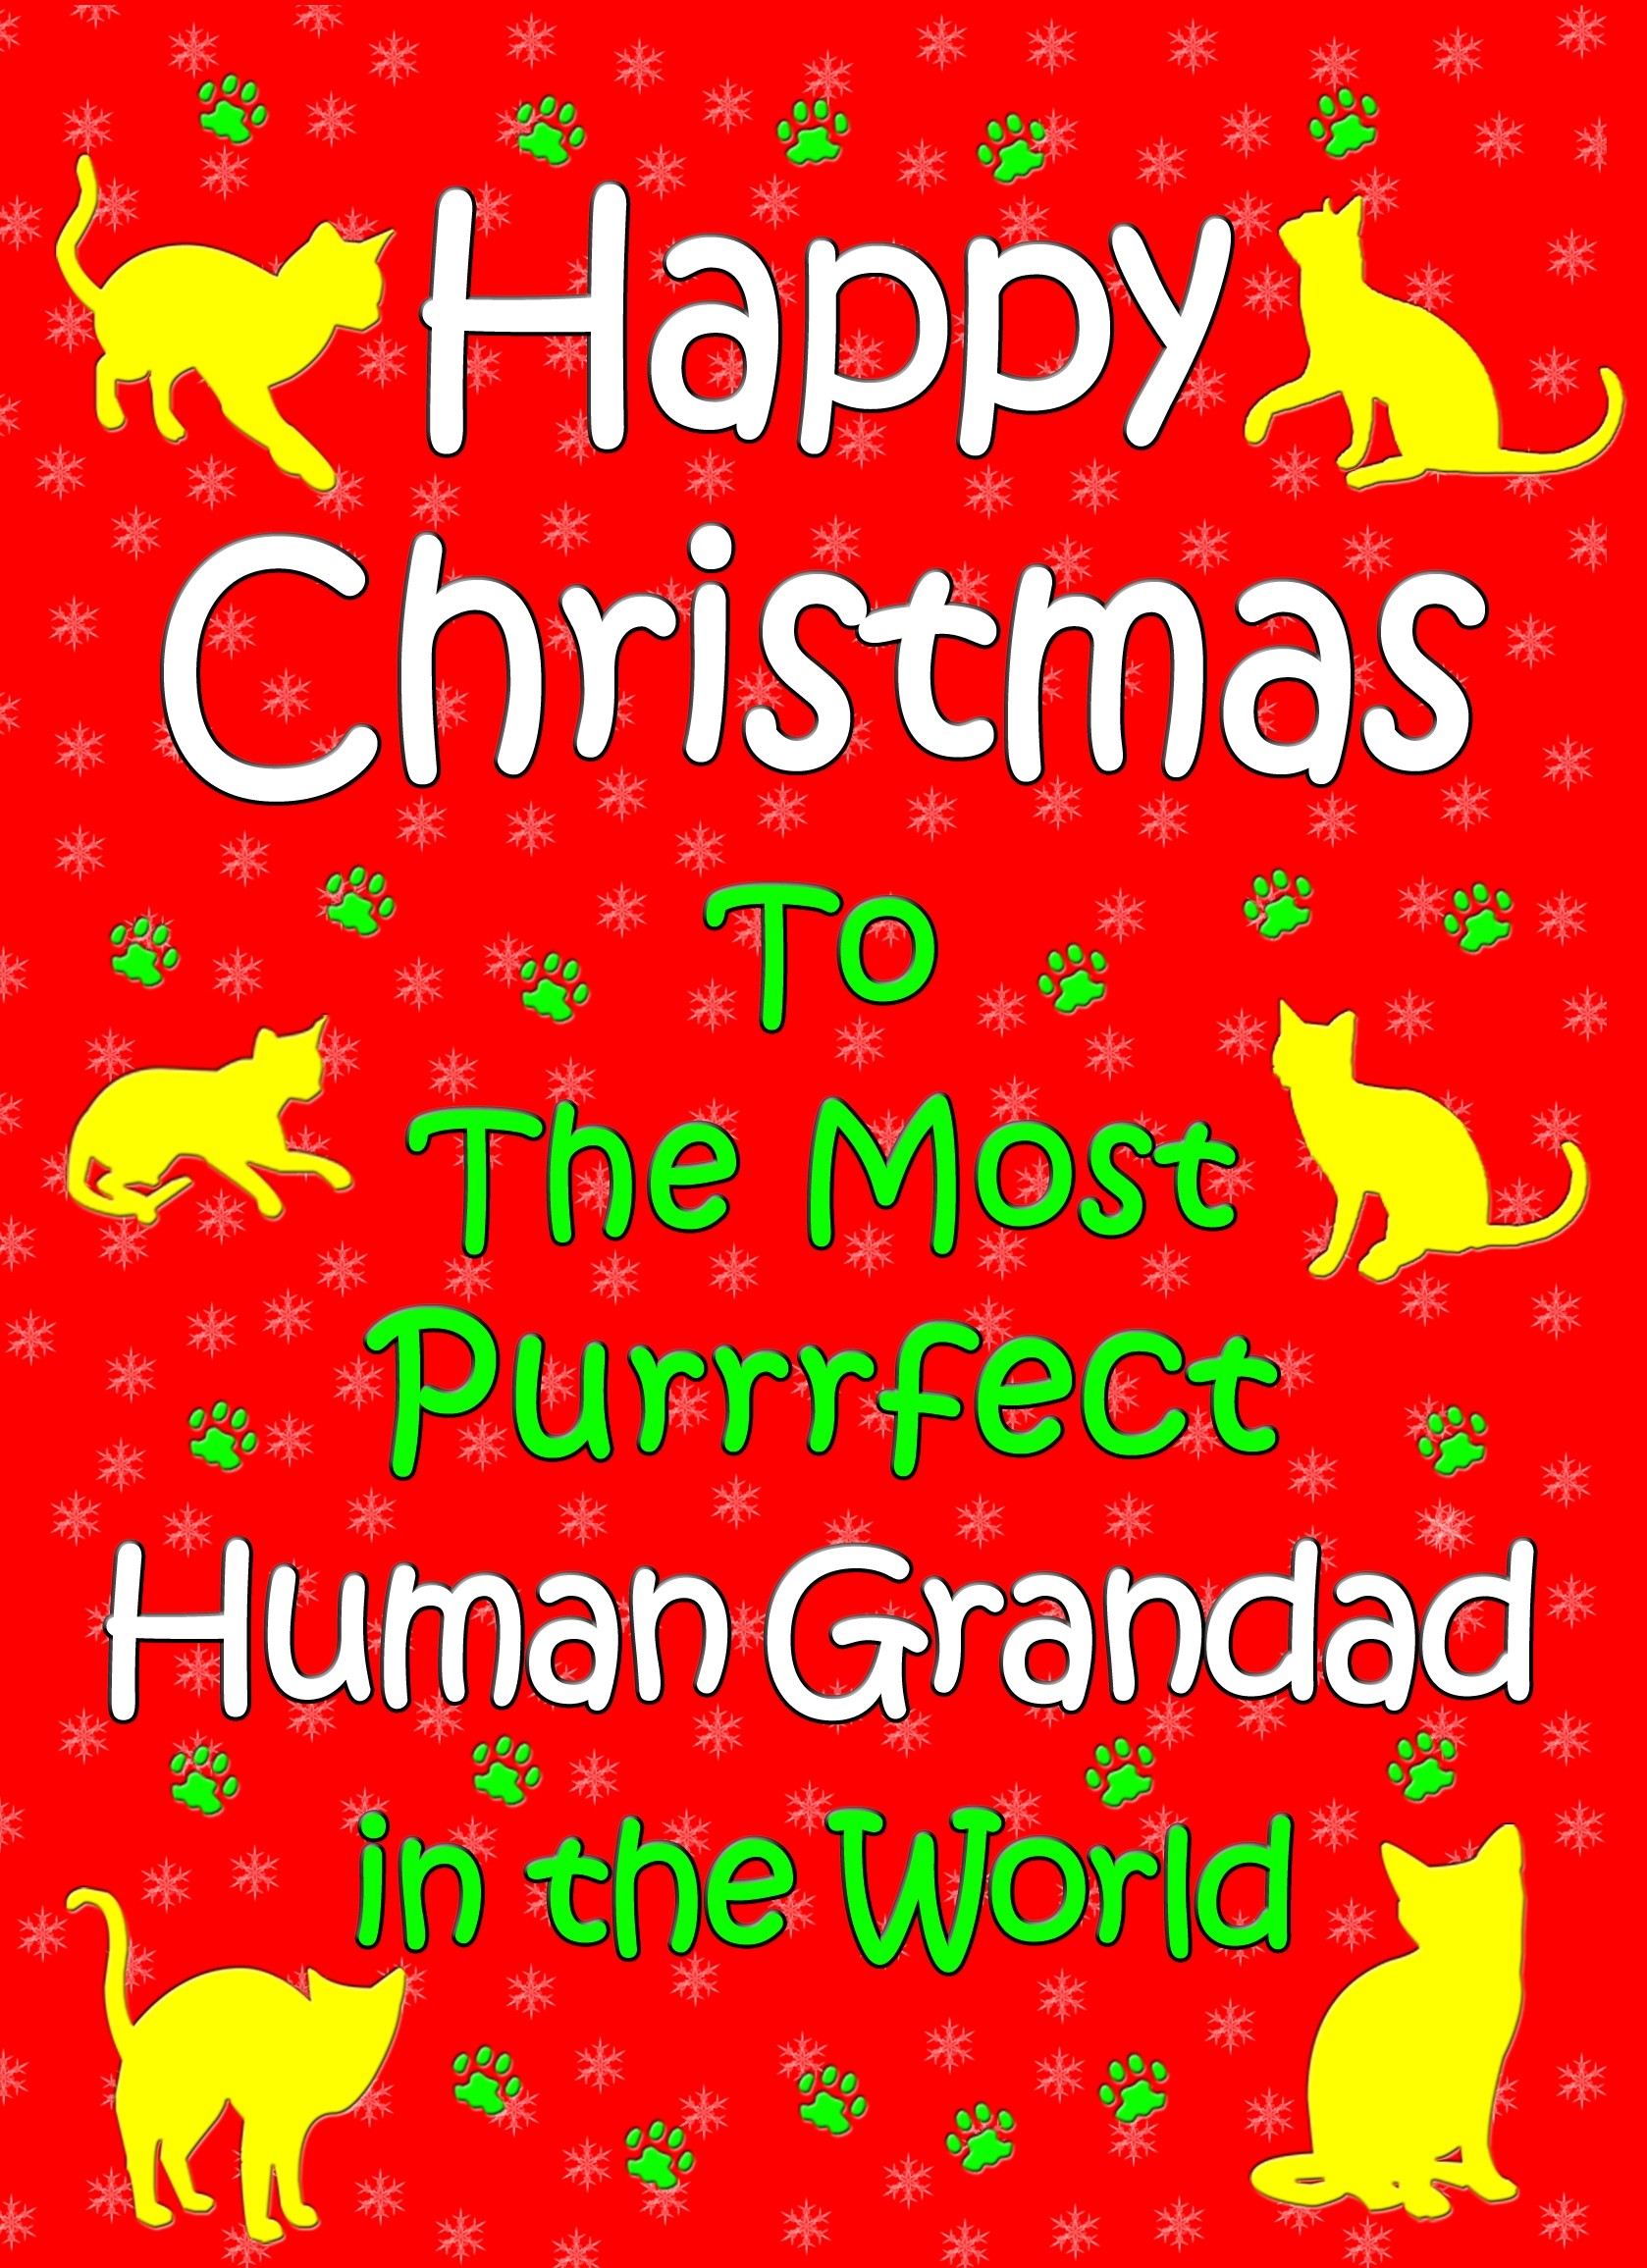 From The Cat Christmas Card (Human Grandad, Red)